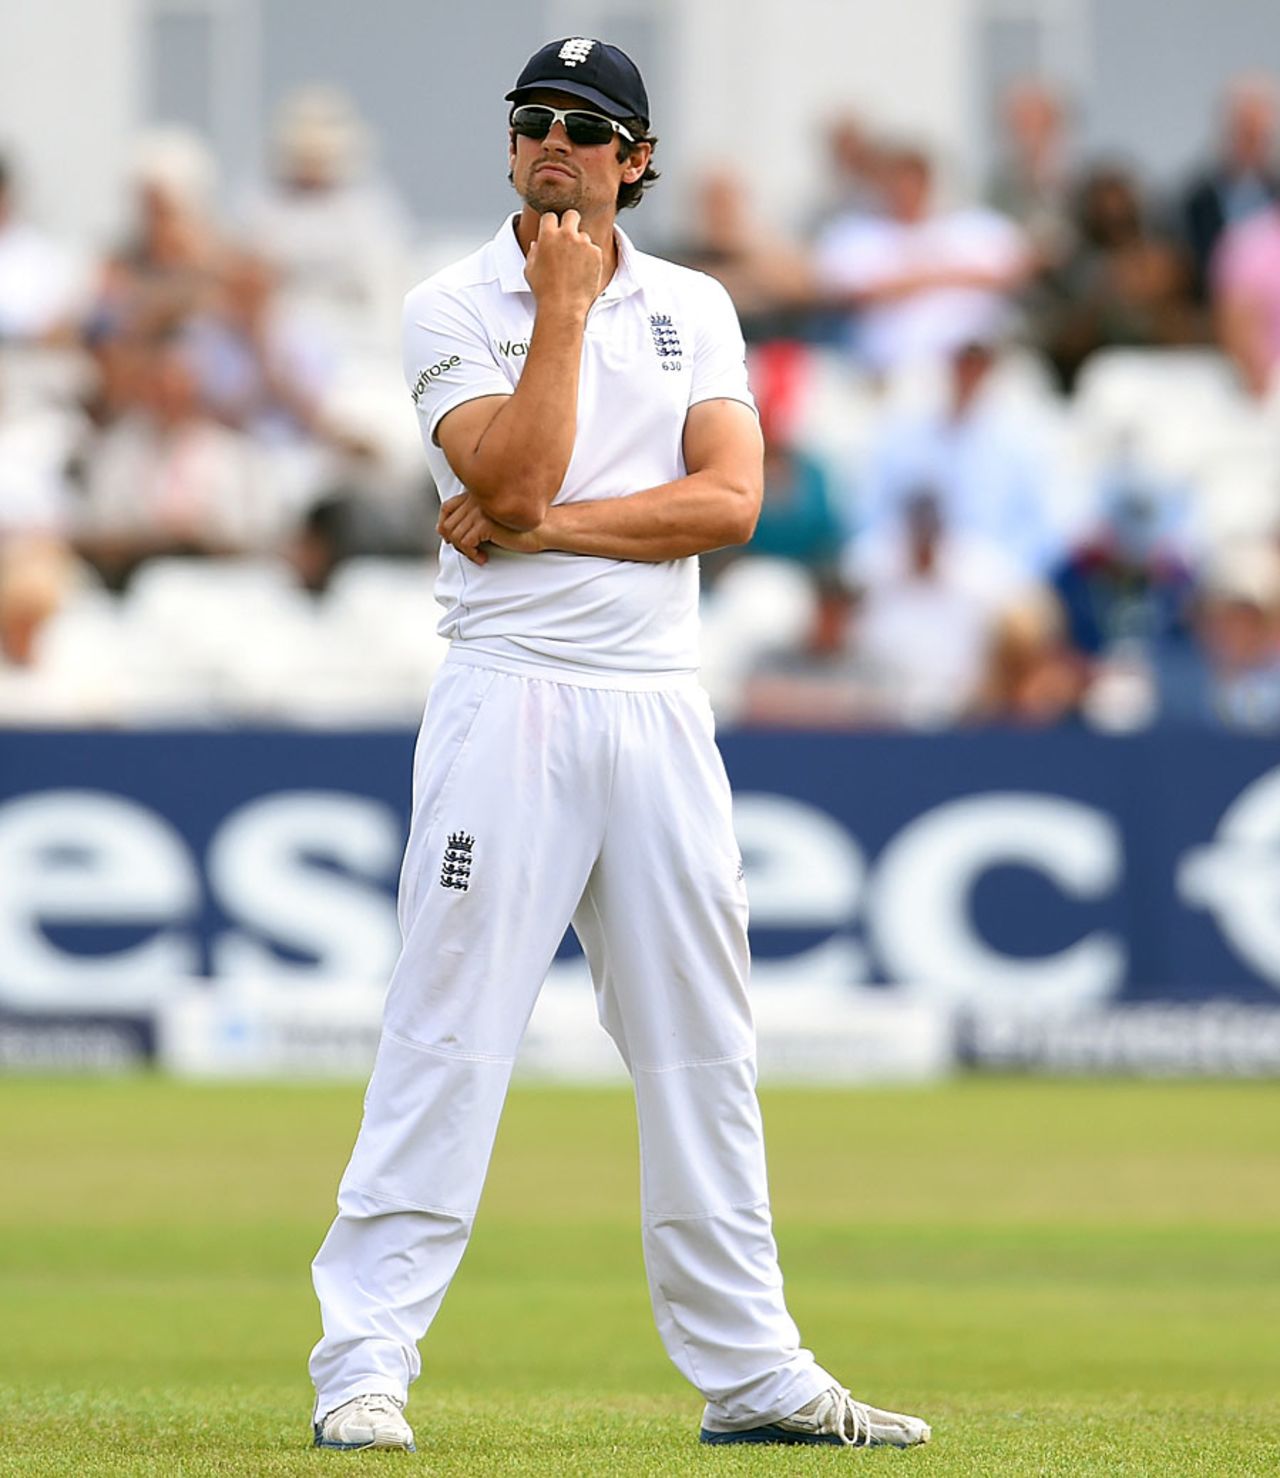 After the initial spurt of wickets, Alastair Cook could only wait and watch, England v India, 1st Investec Test, Trent Bridge, 5th day, July 13, 2014